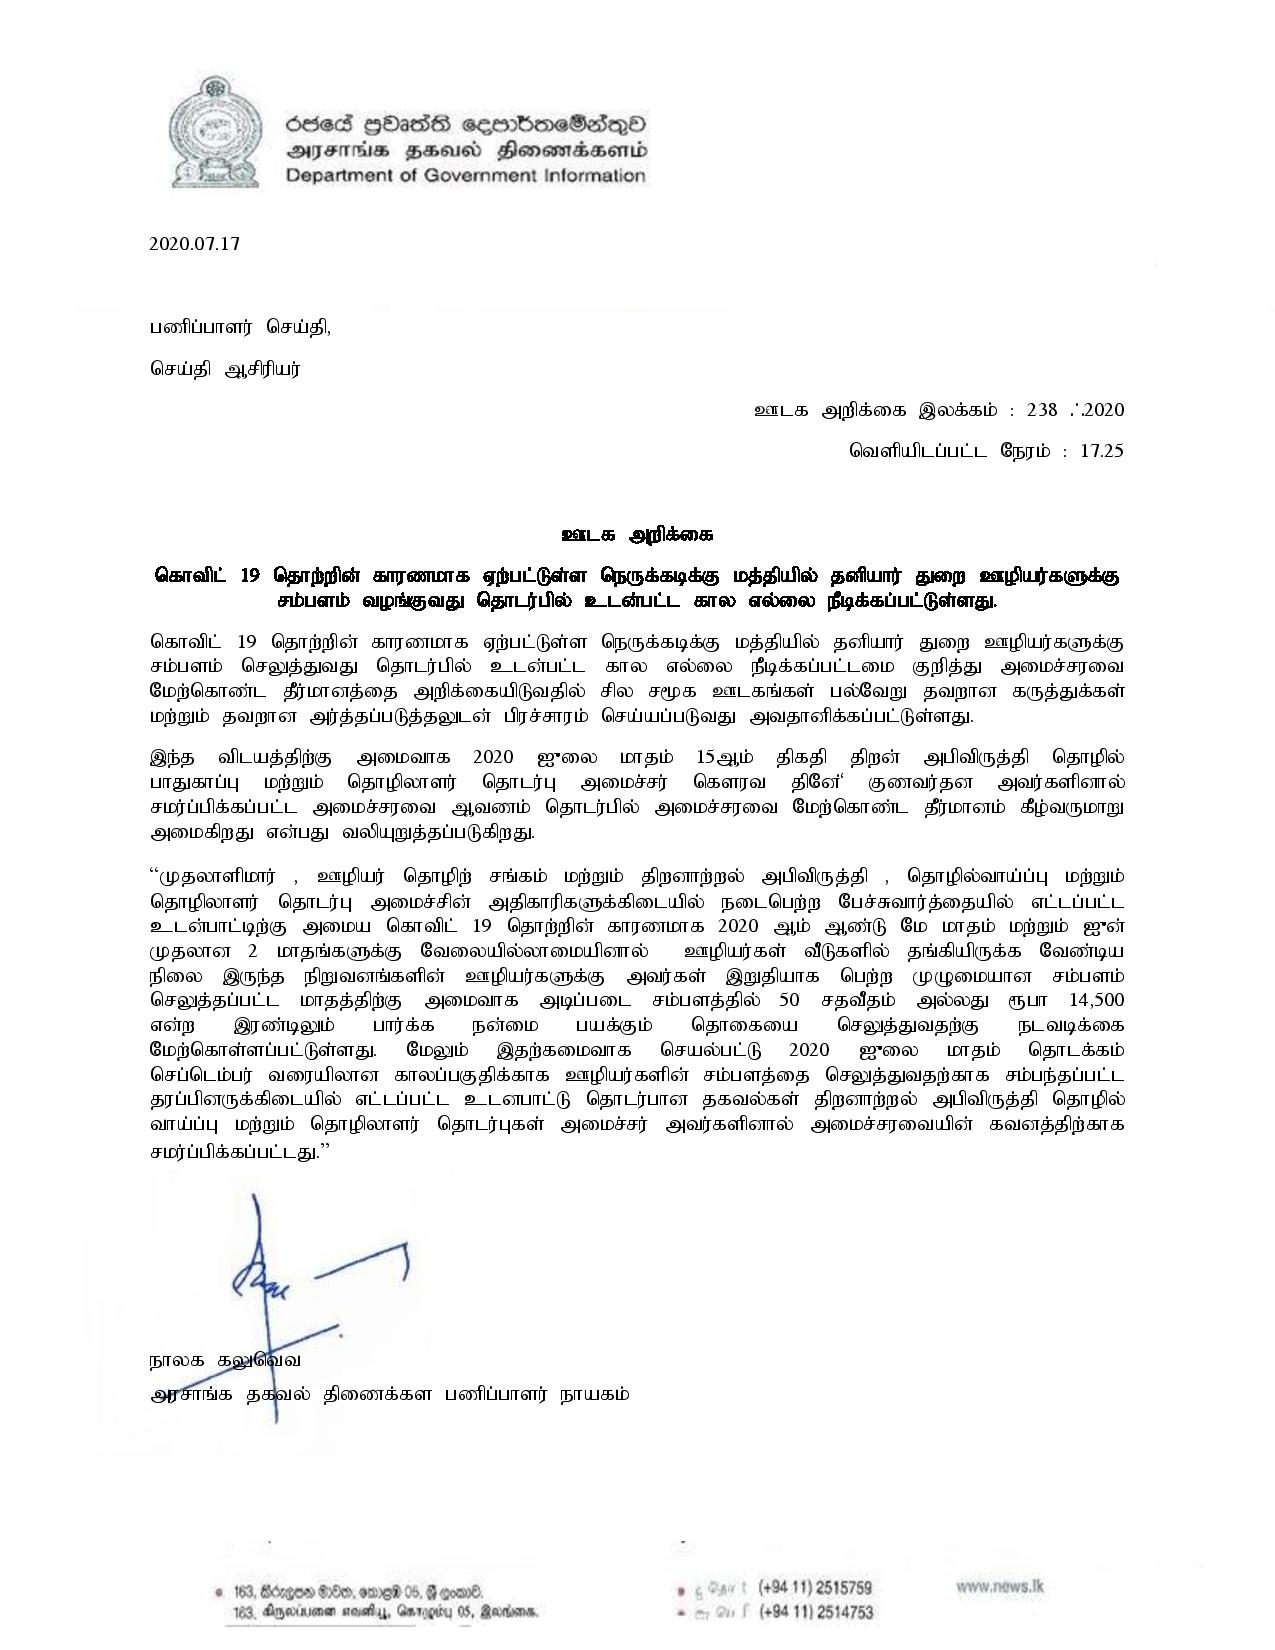 Press Release 238 Tamil page 001